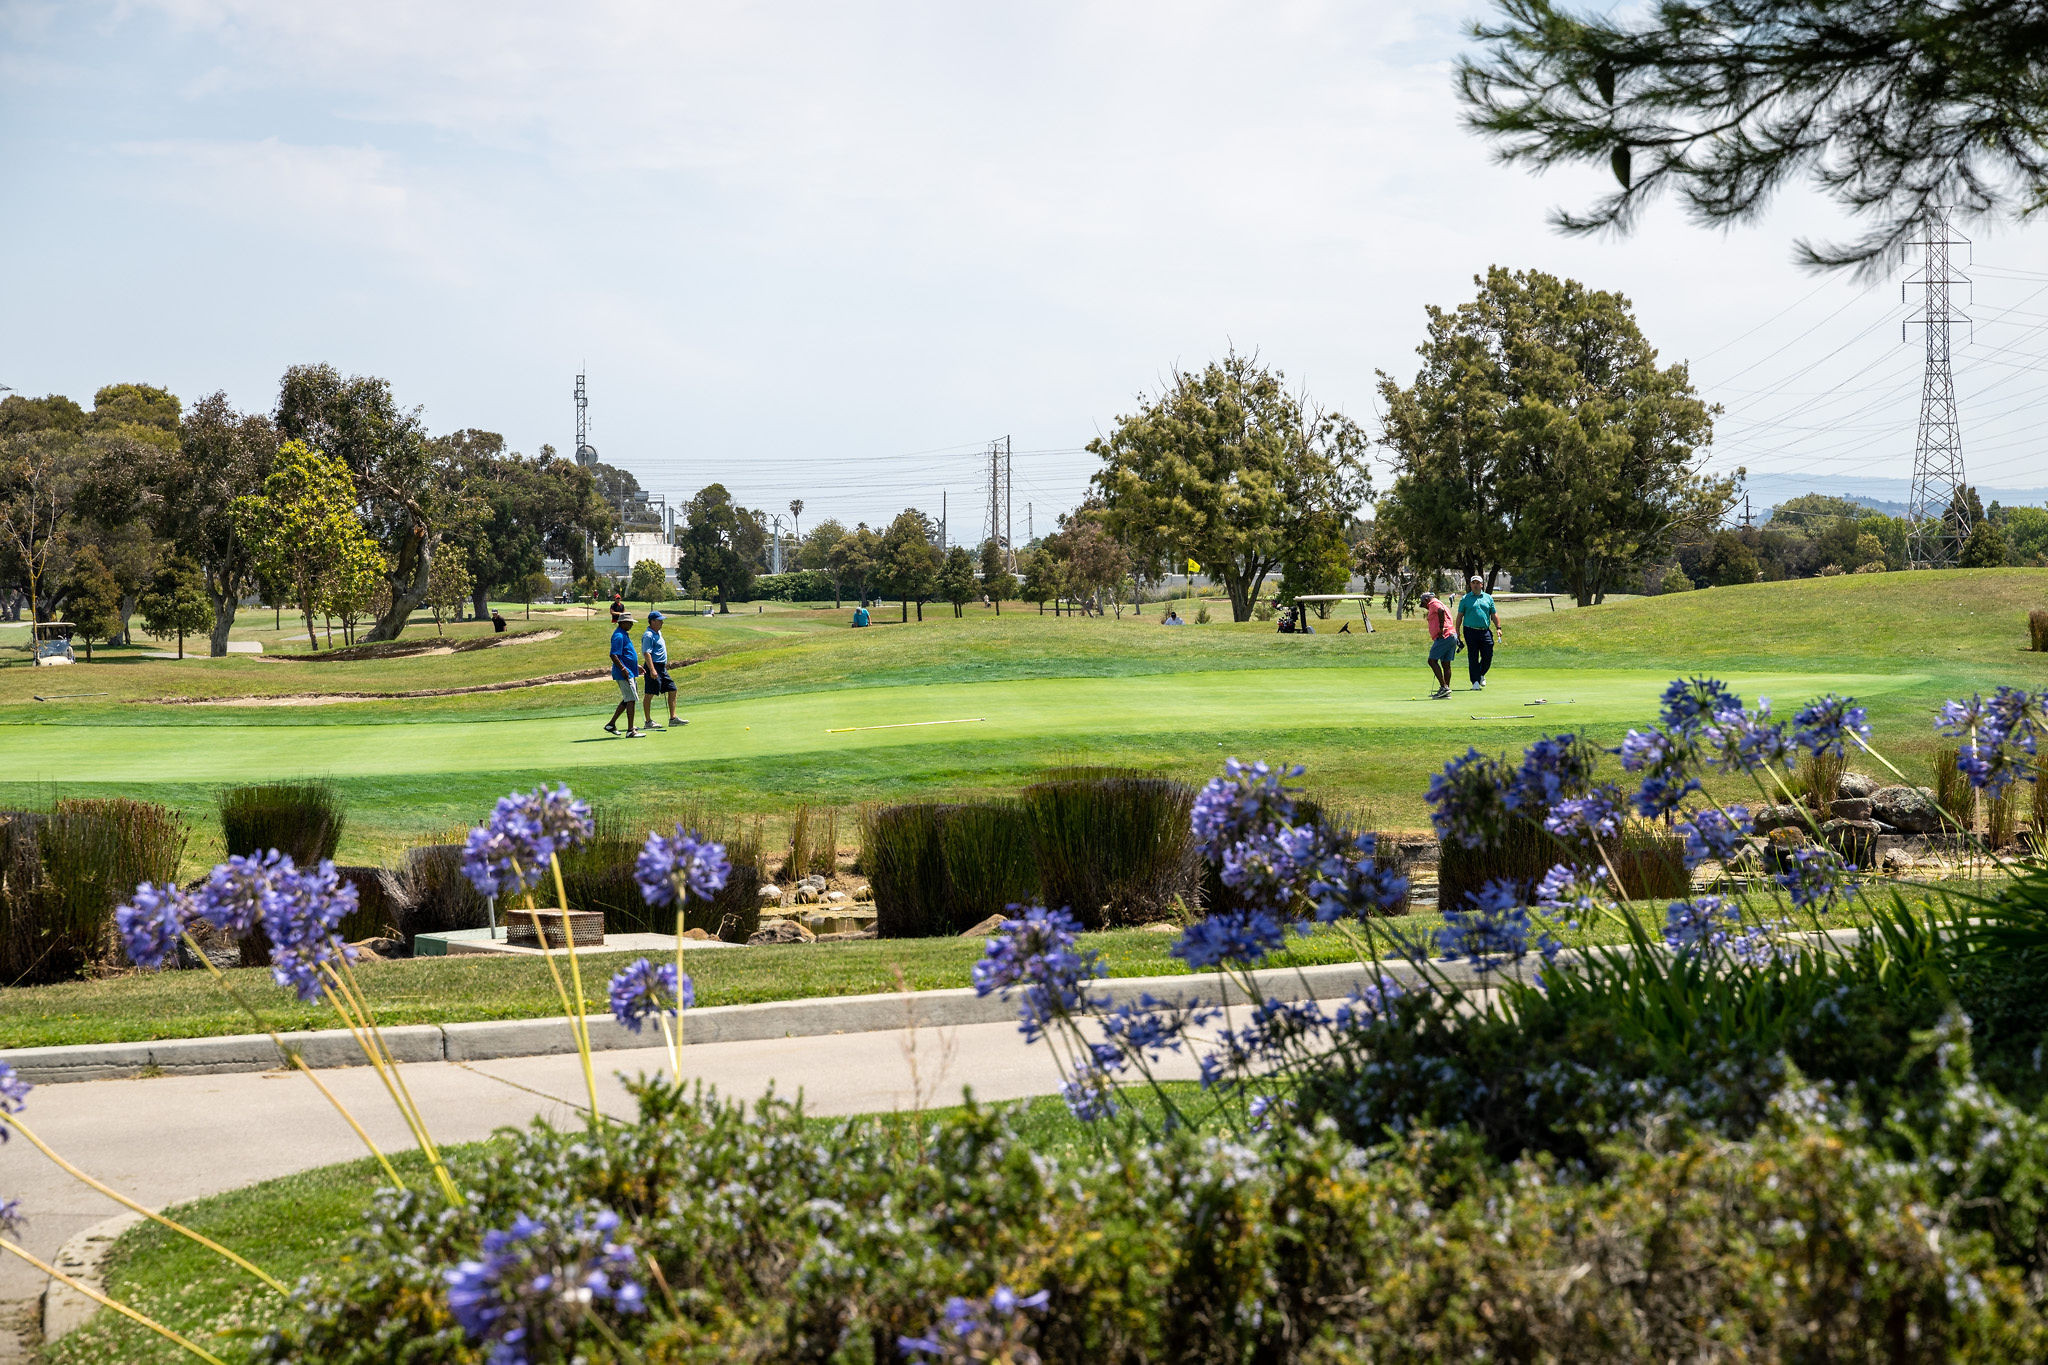 Golf course in the Shoreview area in San Mateo